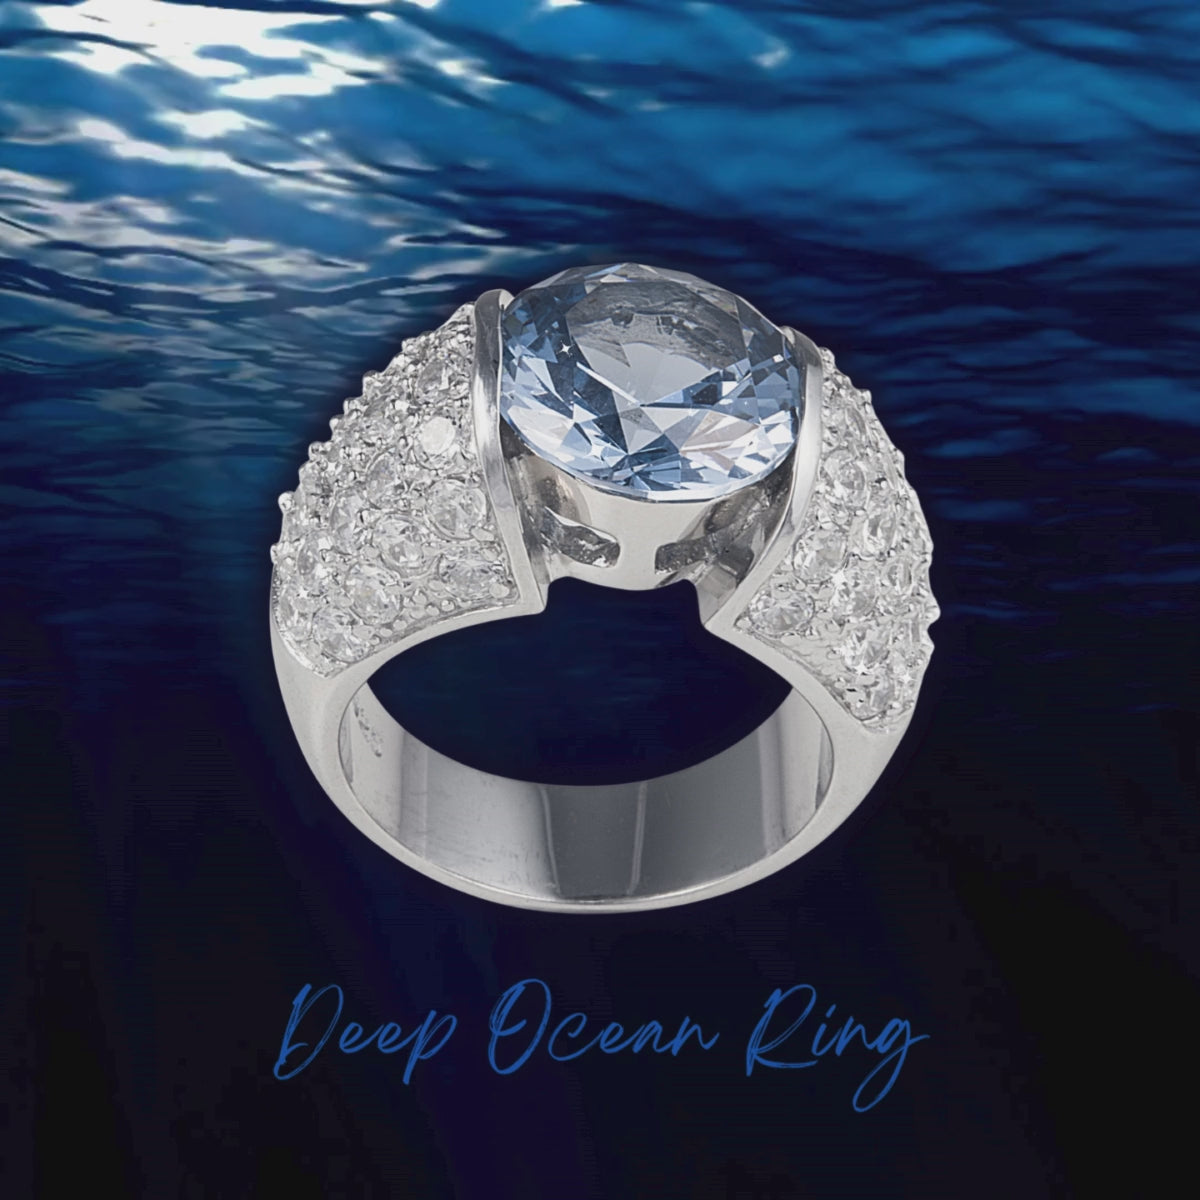 Deep Ocean Ring in 925 sterling silver features a generous 3-carat blue facet cut cubic zirconia stone surrounded by clear cubic zirconia stones. Worldwide shipping. Affordable luxury jewellery by Bellagio & Co.